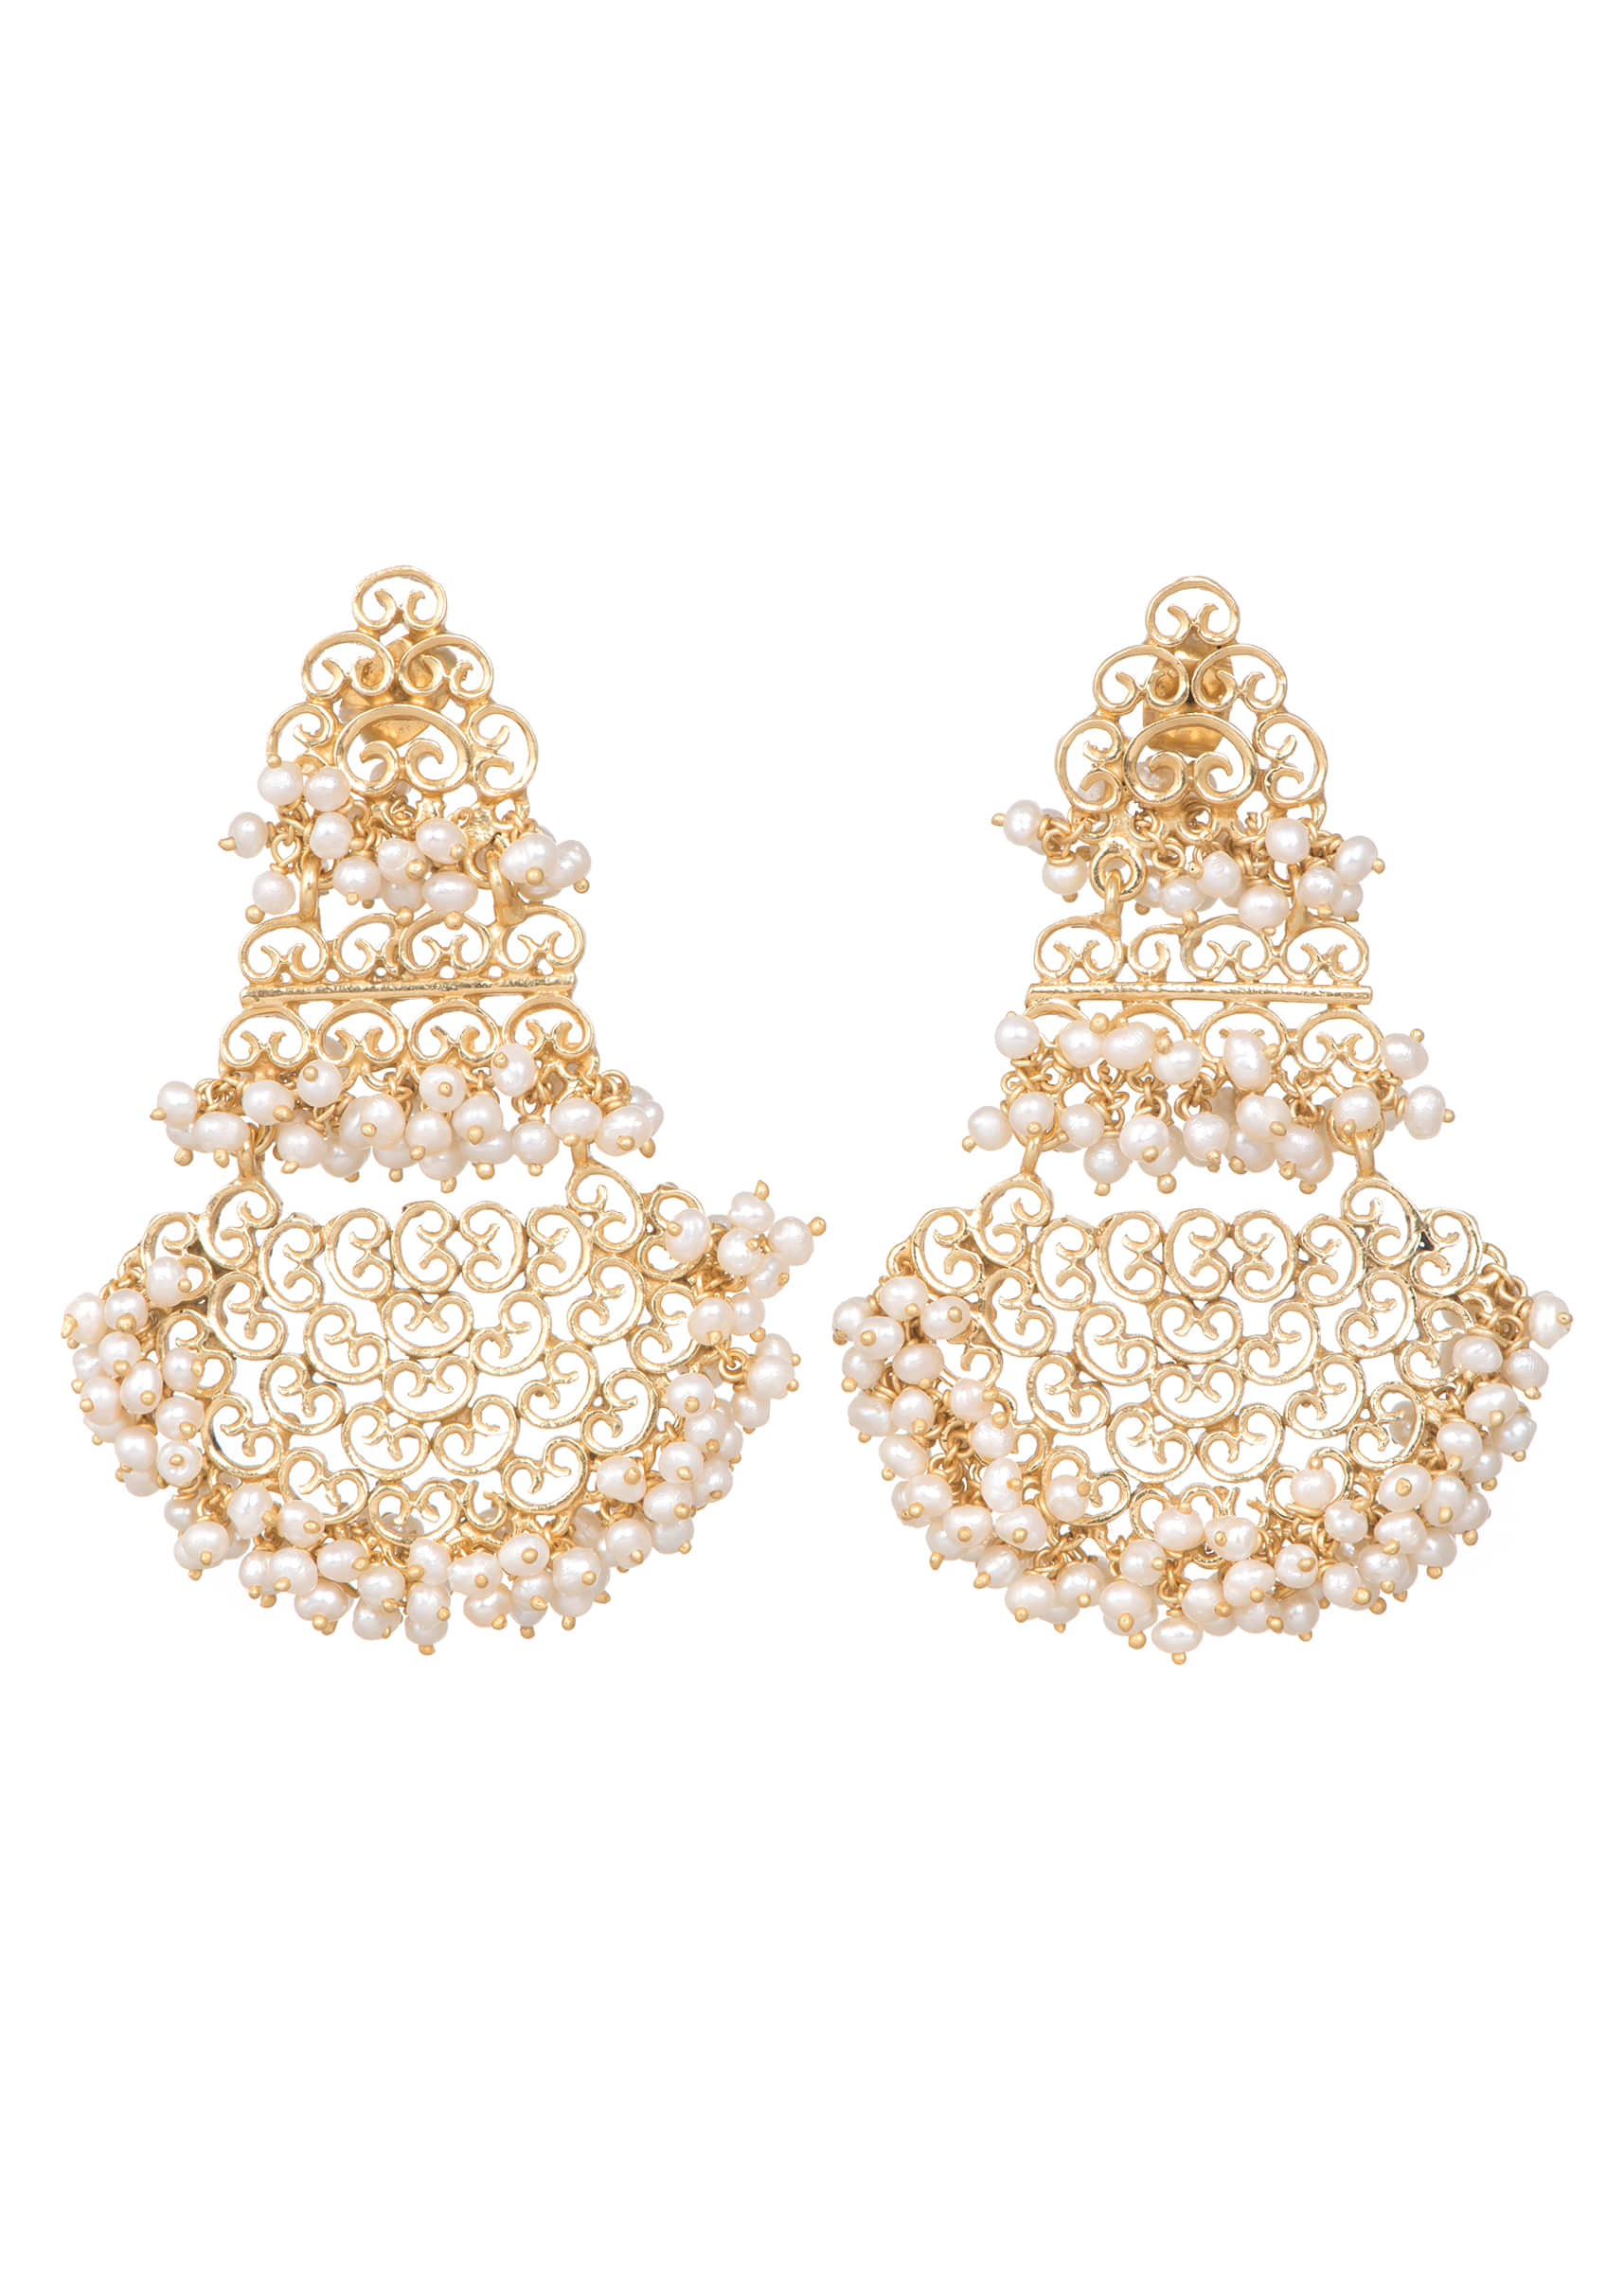 Gold Plated Earrings With Frills Of Pearls And Carved Filigree Detailing By Zariin